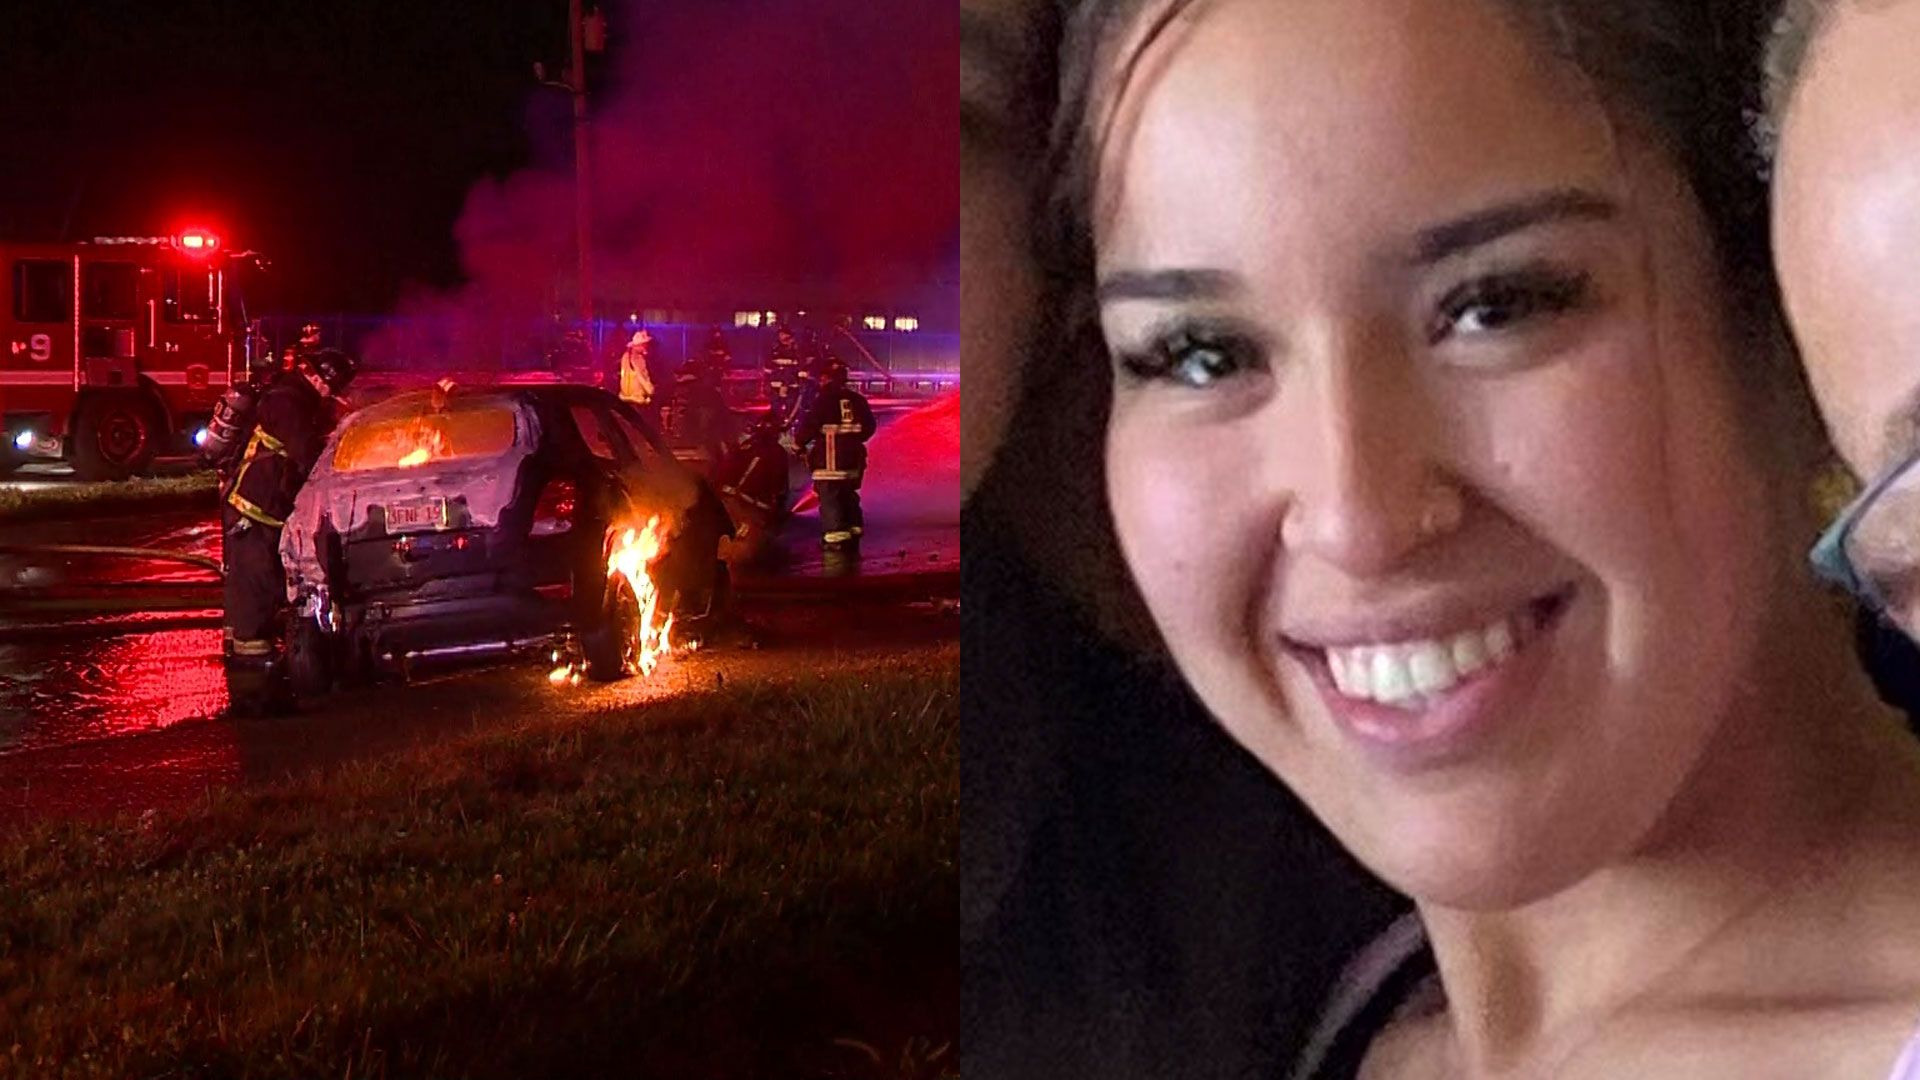 Young Woman Survives Severe Burns On After Fiery Car Crash